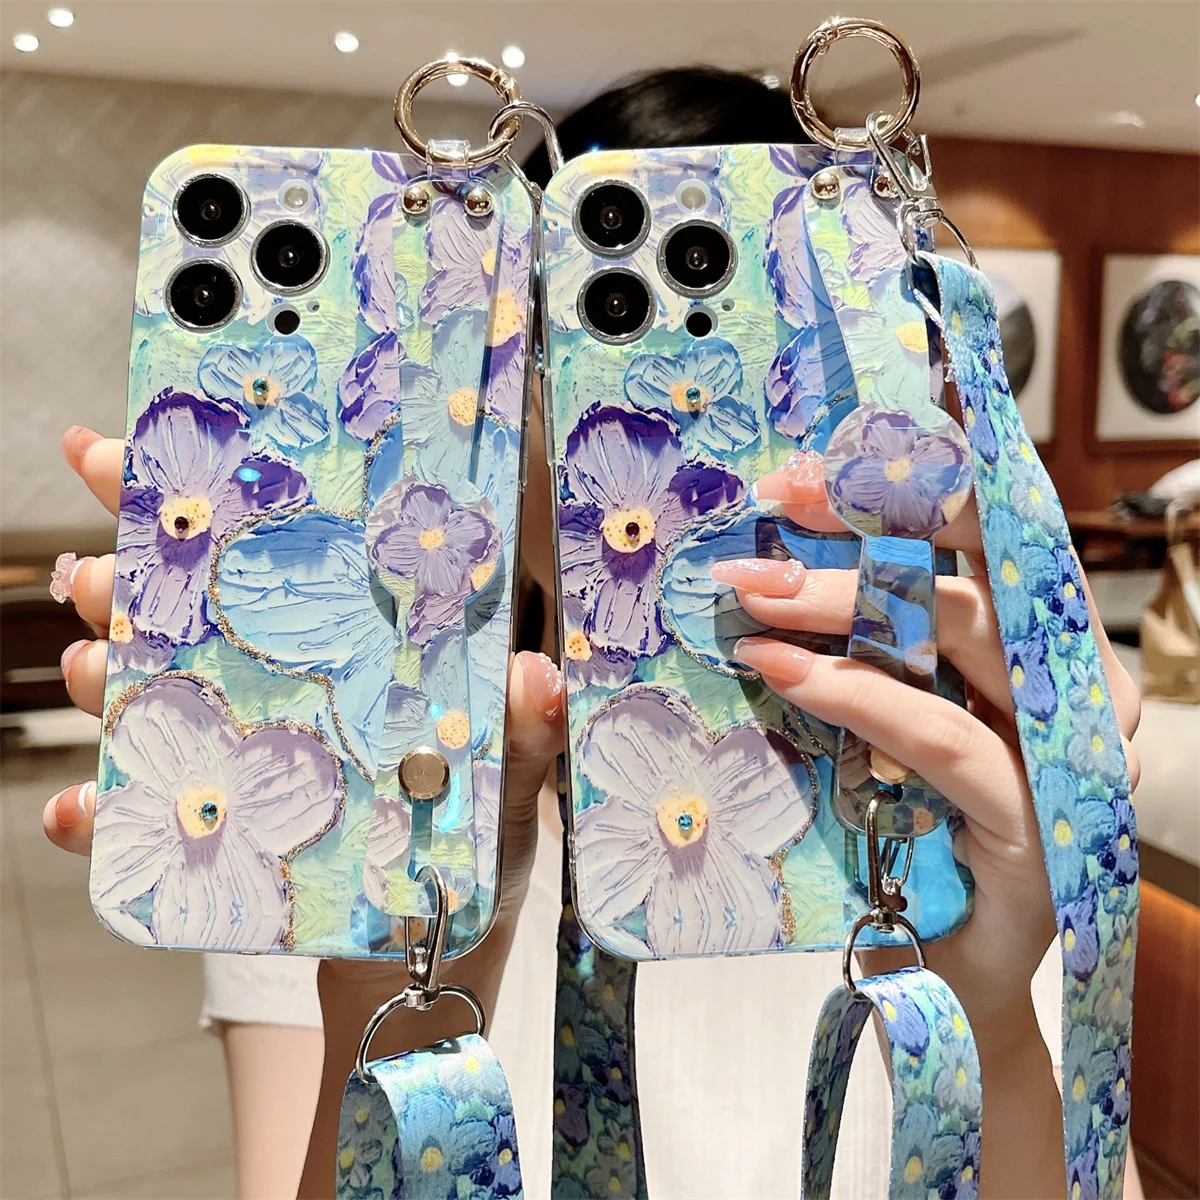 

Blu-ray Flower Lanyard Phone Case For Samsung Galaxy S20 FE S21 S22 Plus S23 Note 10 20 Ultra Wrist Strap Shell Protective Cover